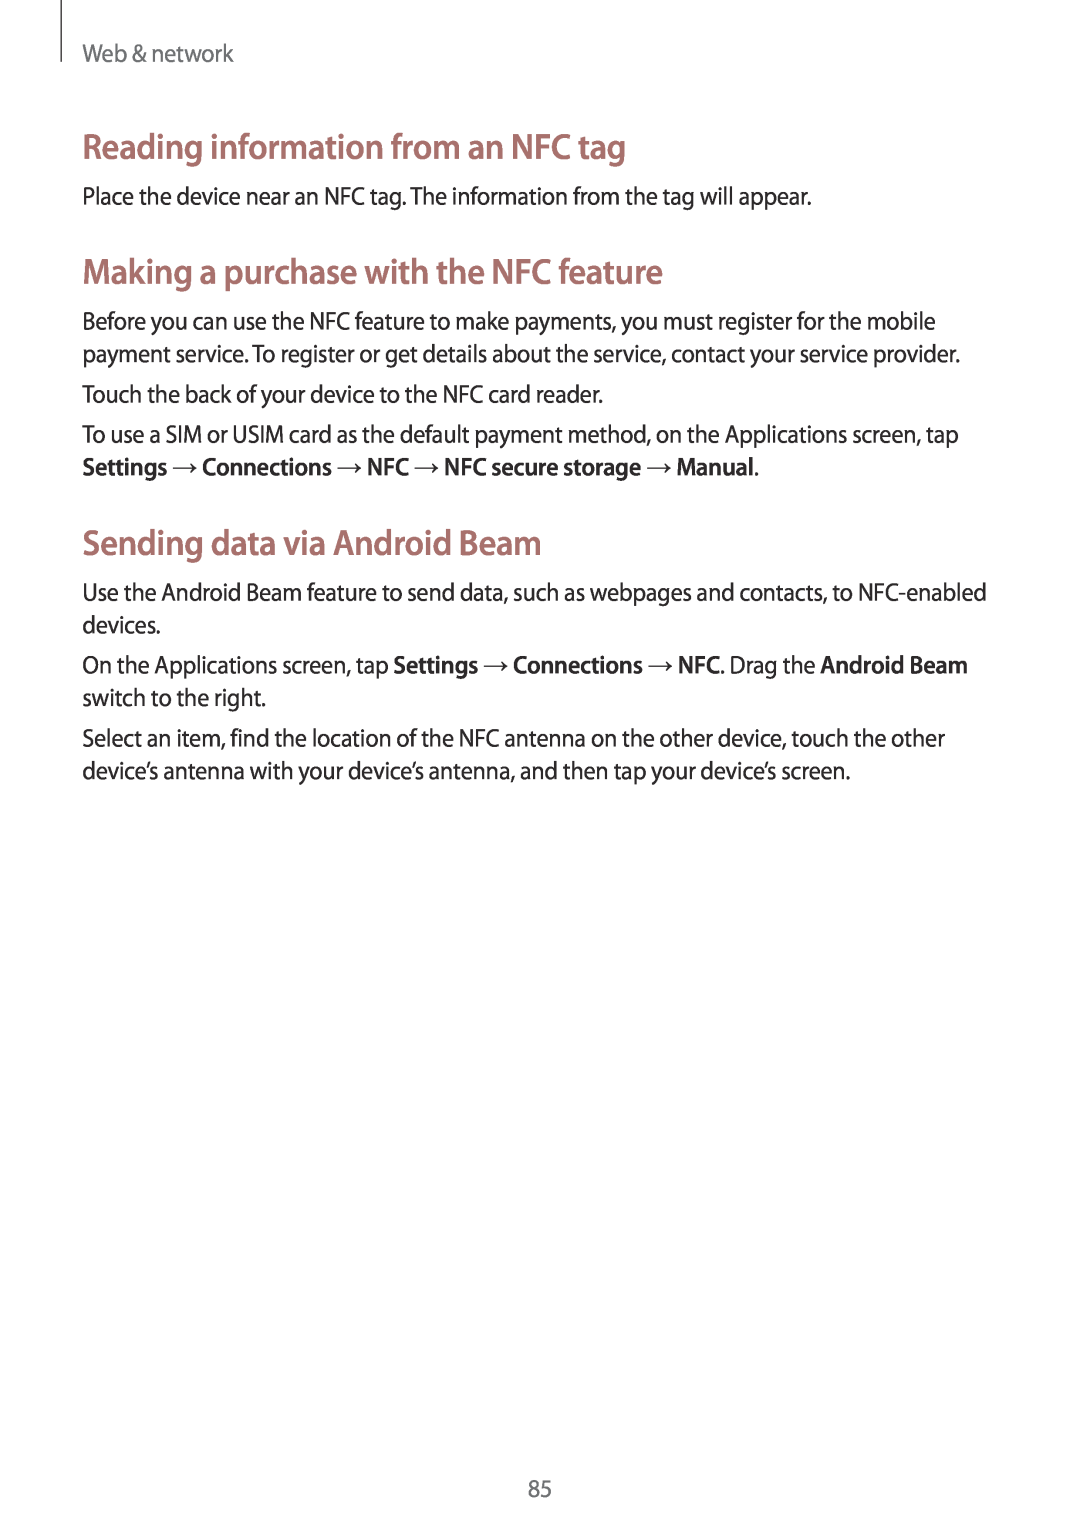 Samsung SM-N9005ZKEEGY manual Reading information from an NFC tag, Making a purchase with the NFC feature, Web & network 